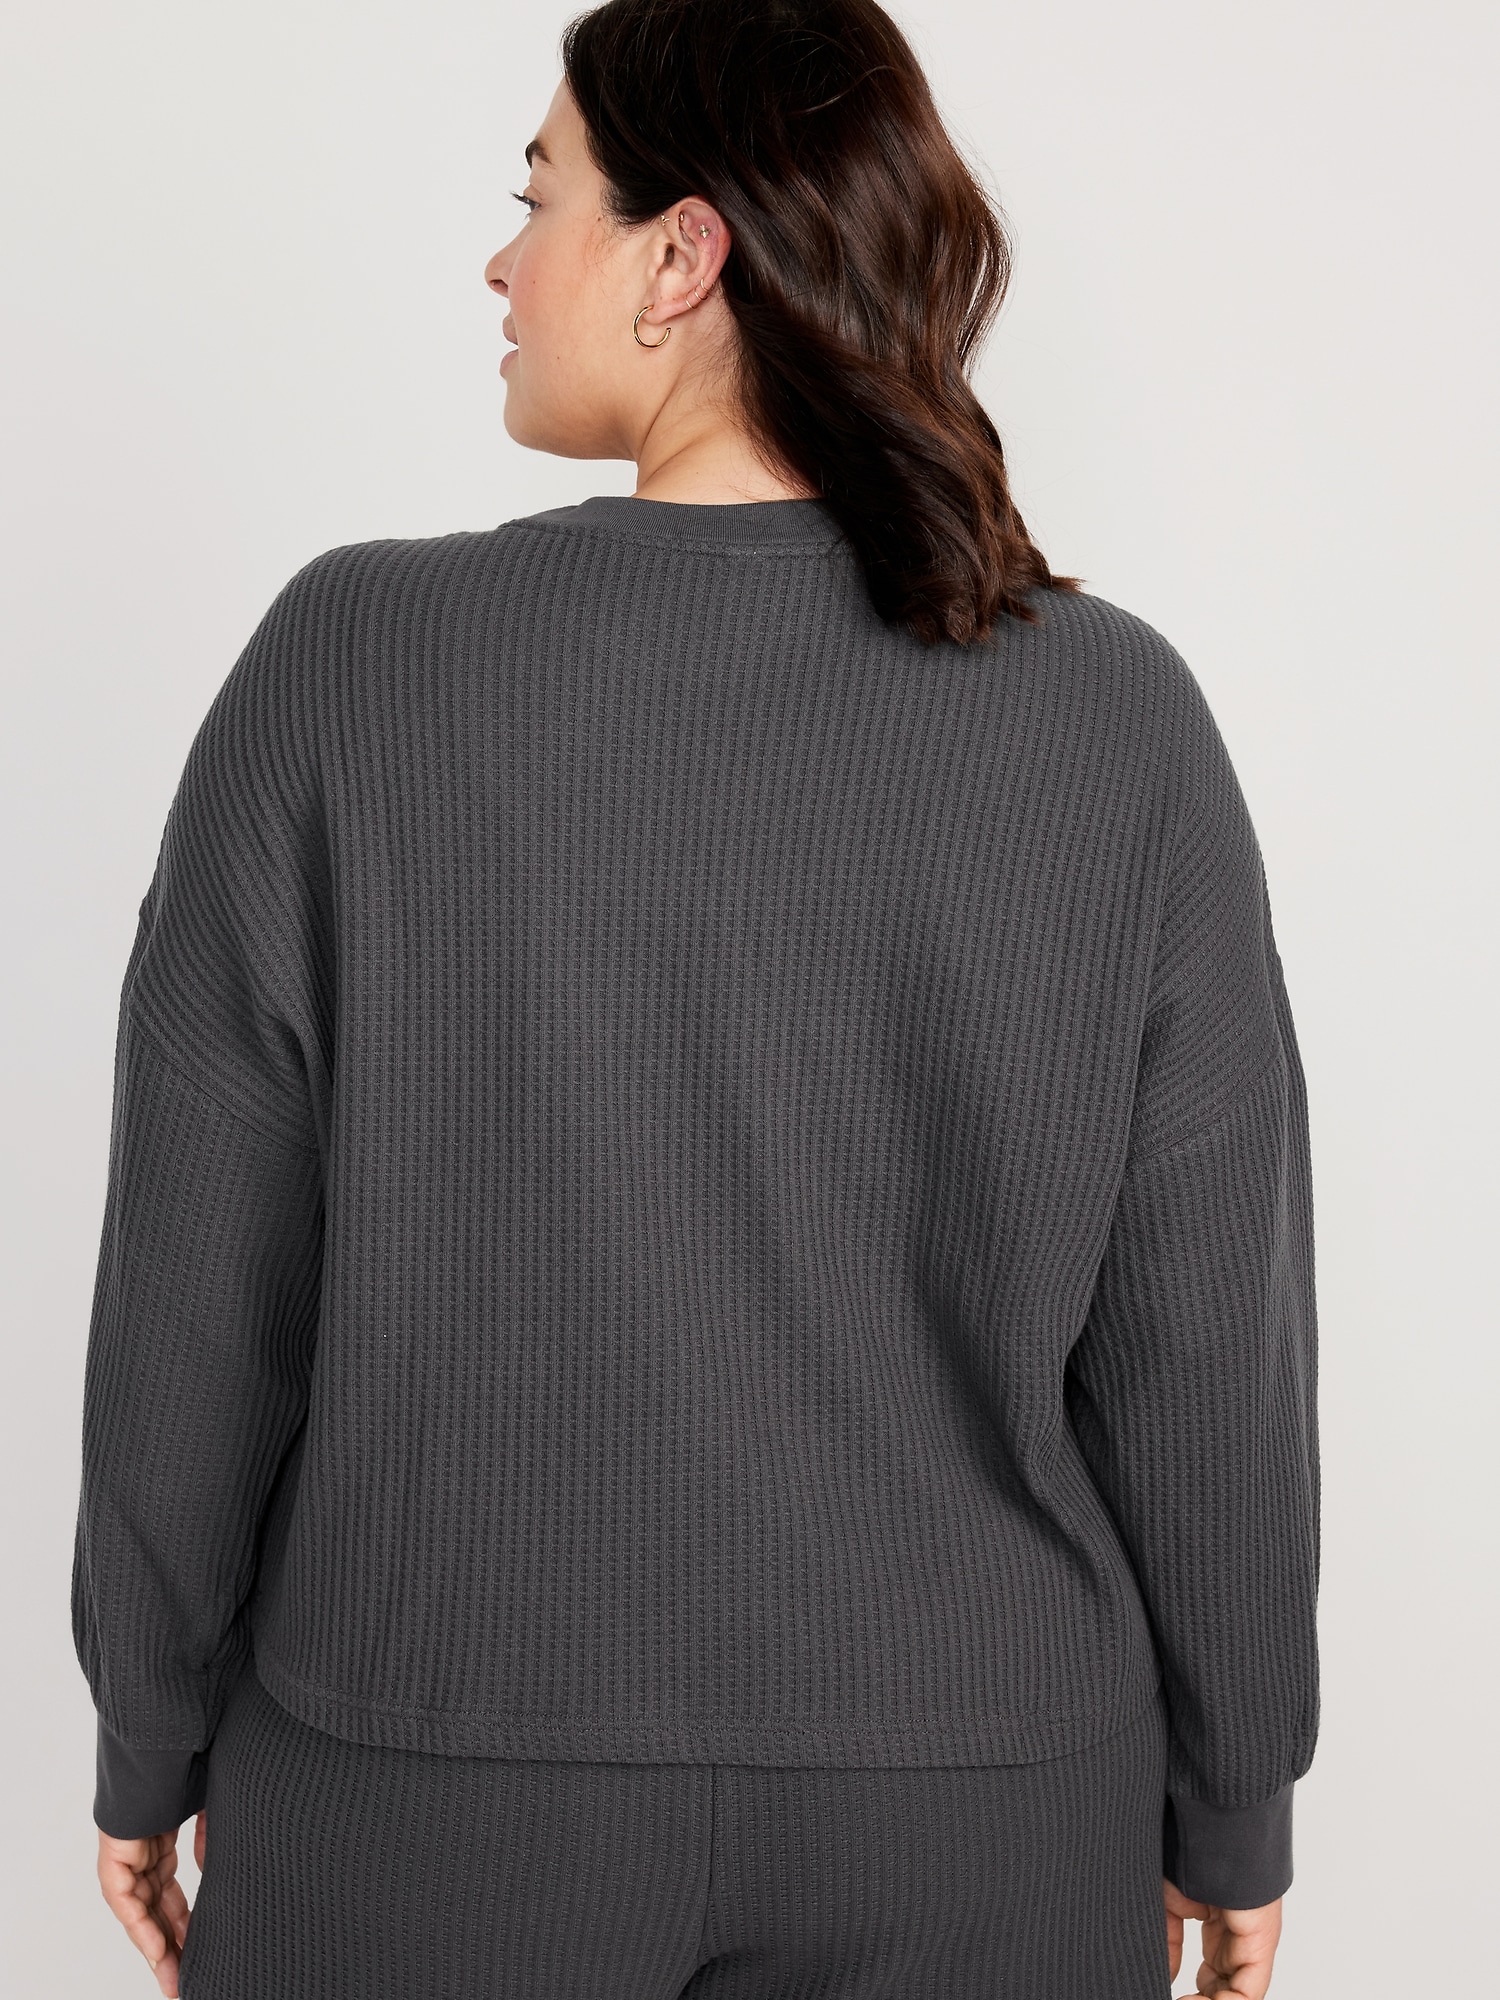 Long-Sleeve Waffle-Knit Pajama Top for Women | Old Navy